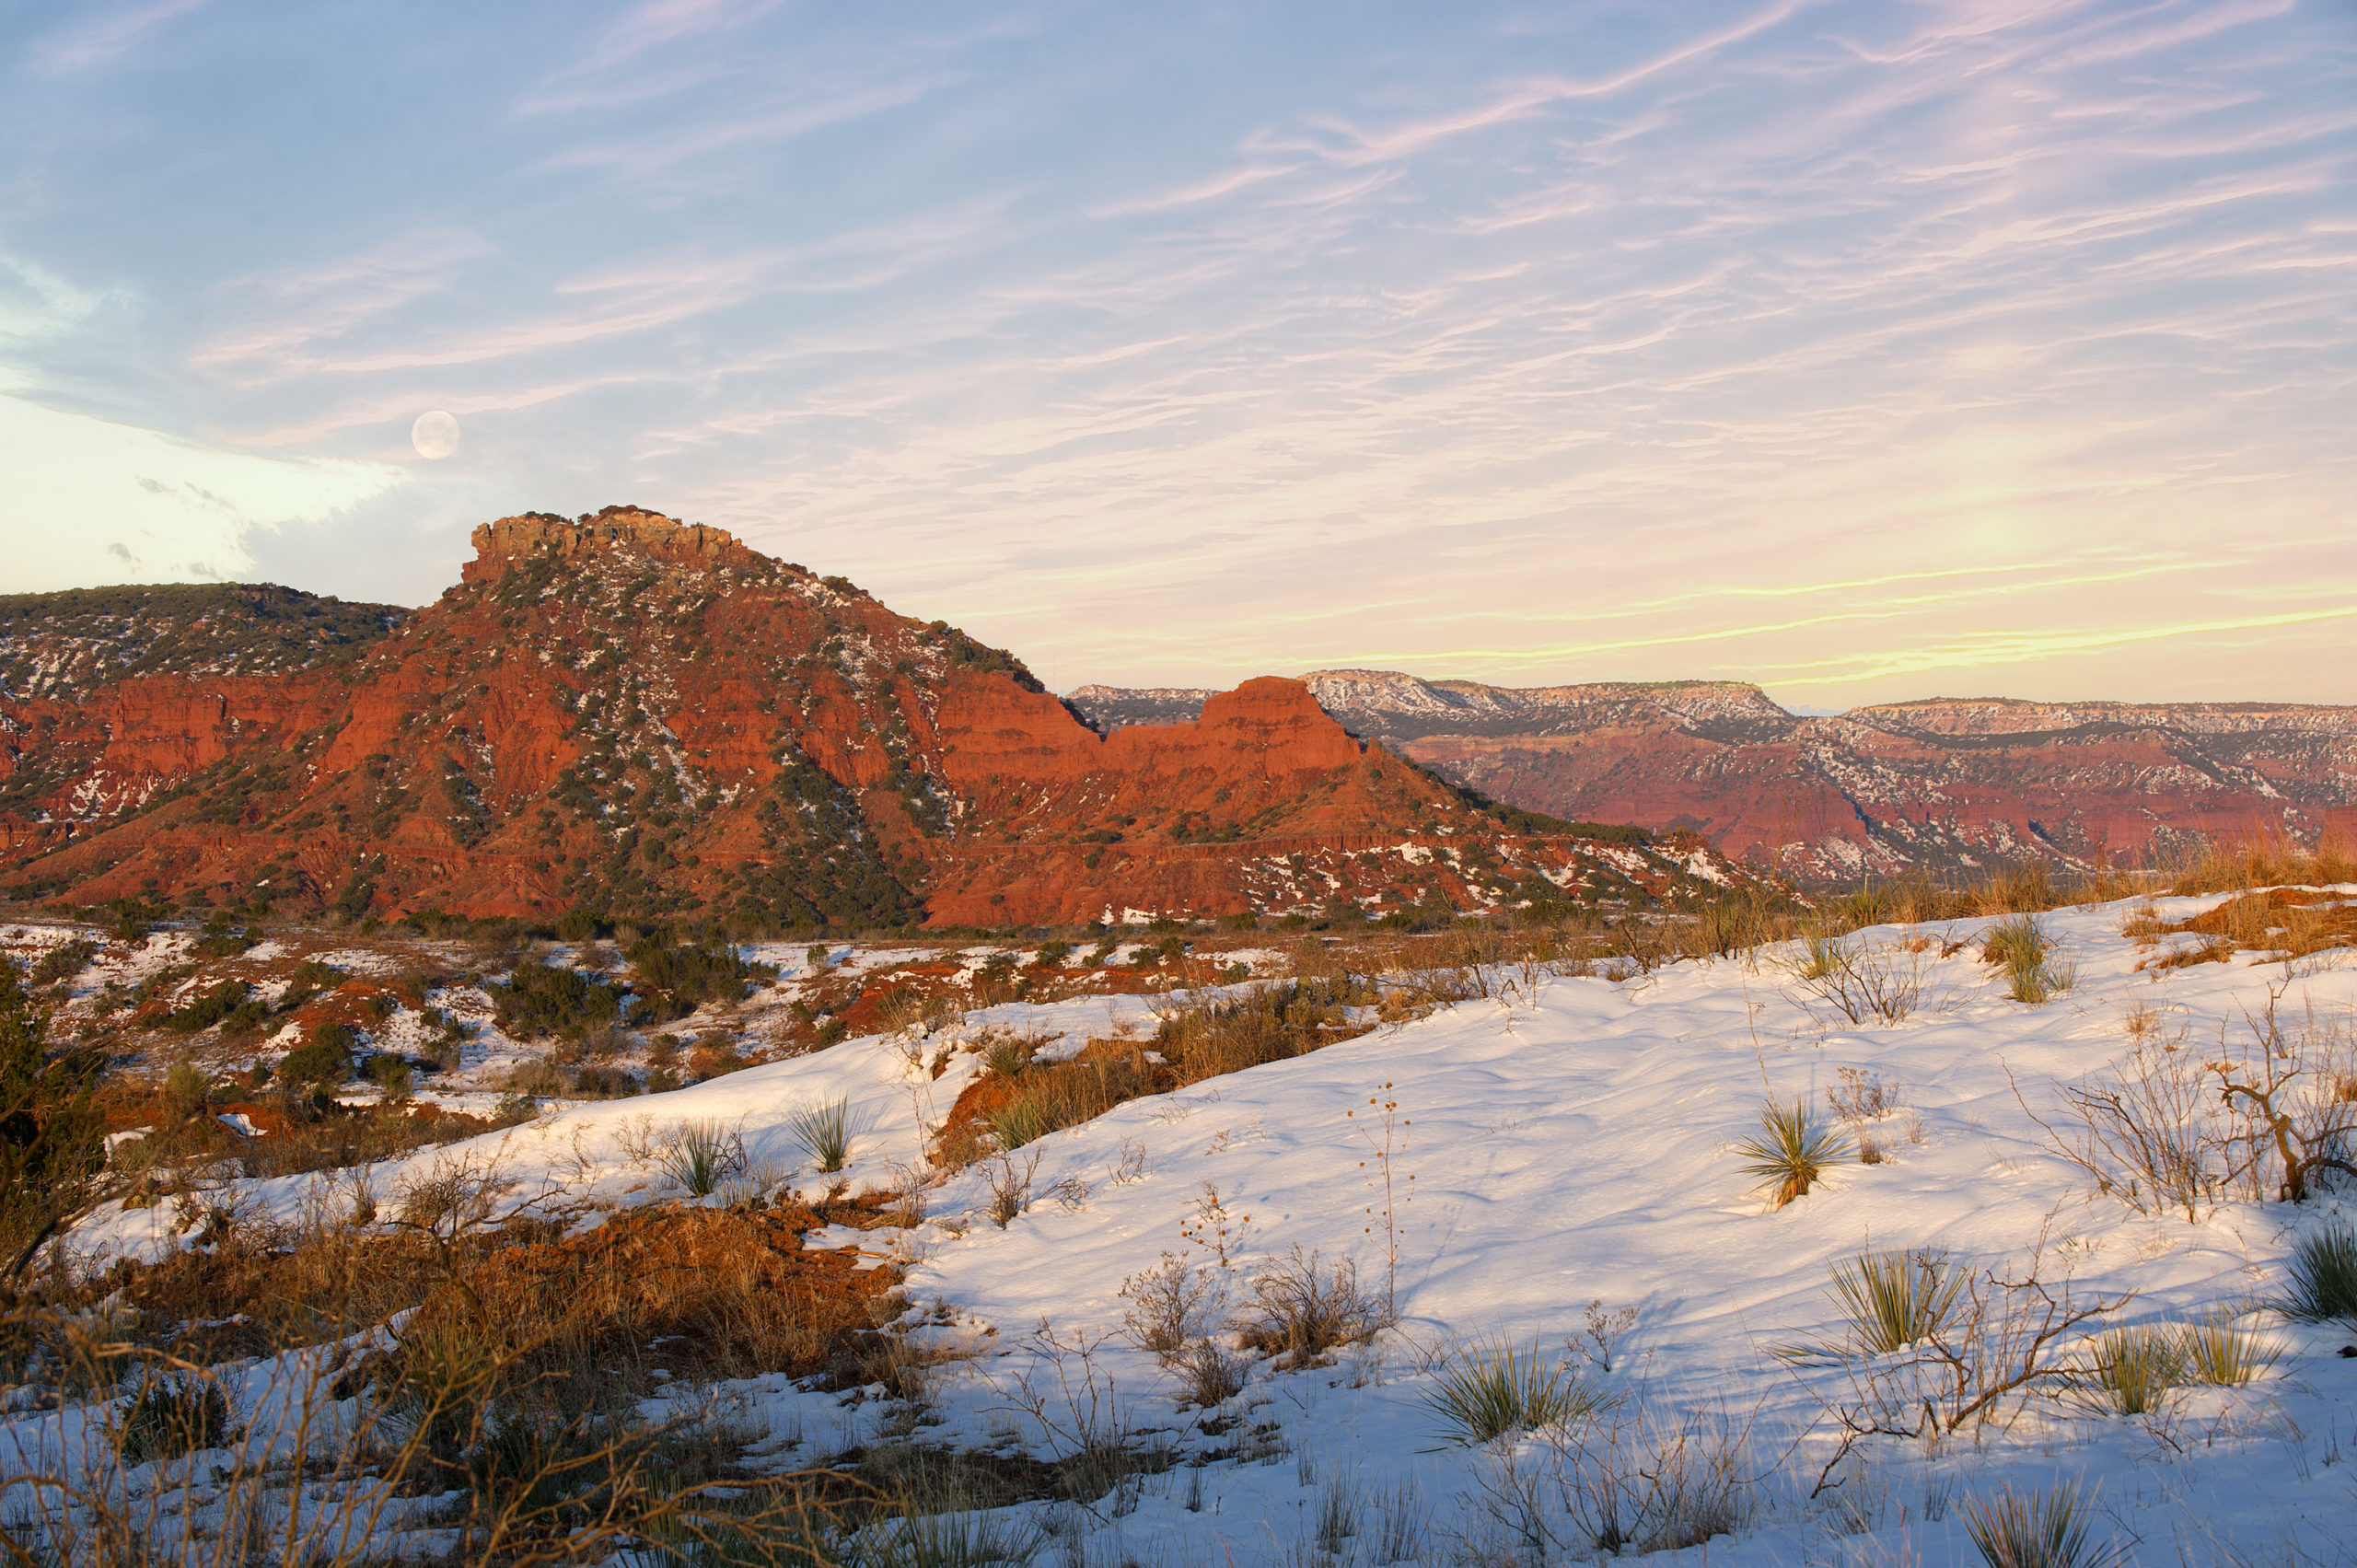 SUNRISE AT CAPROCK CANYONS STATE PARK AFTER A RECENT SNOW.